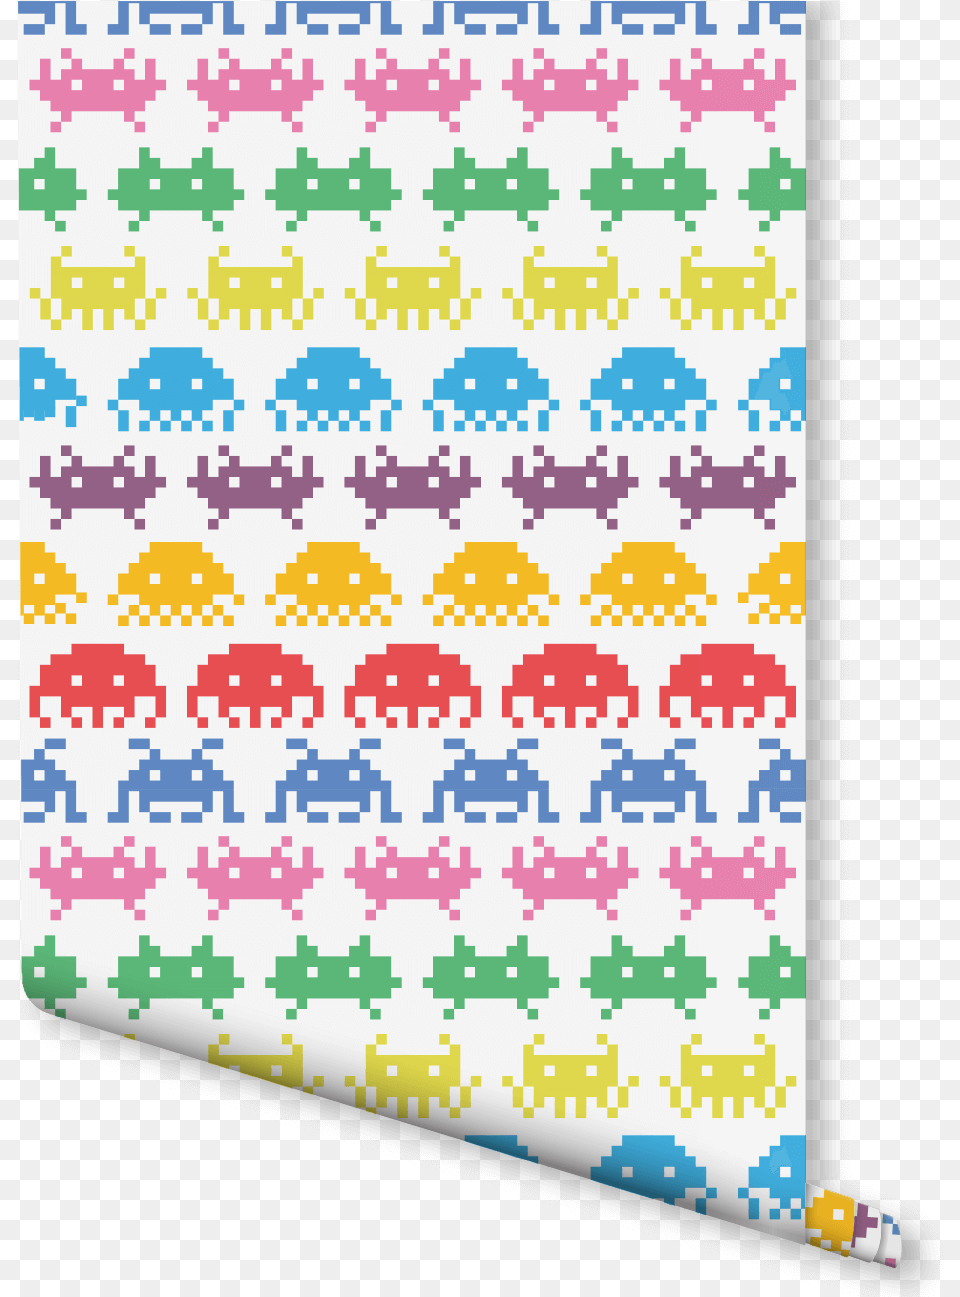 Invaders Wallpaper In 2020 Kids Space Invaders, Qr Code Free Transparent Png